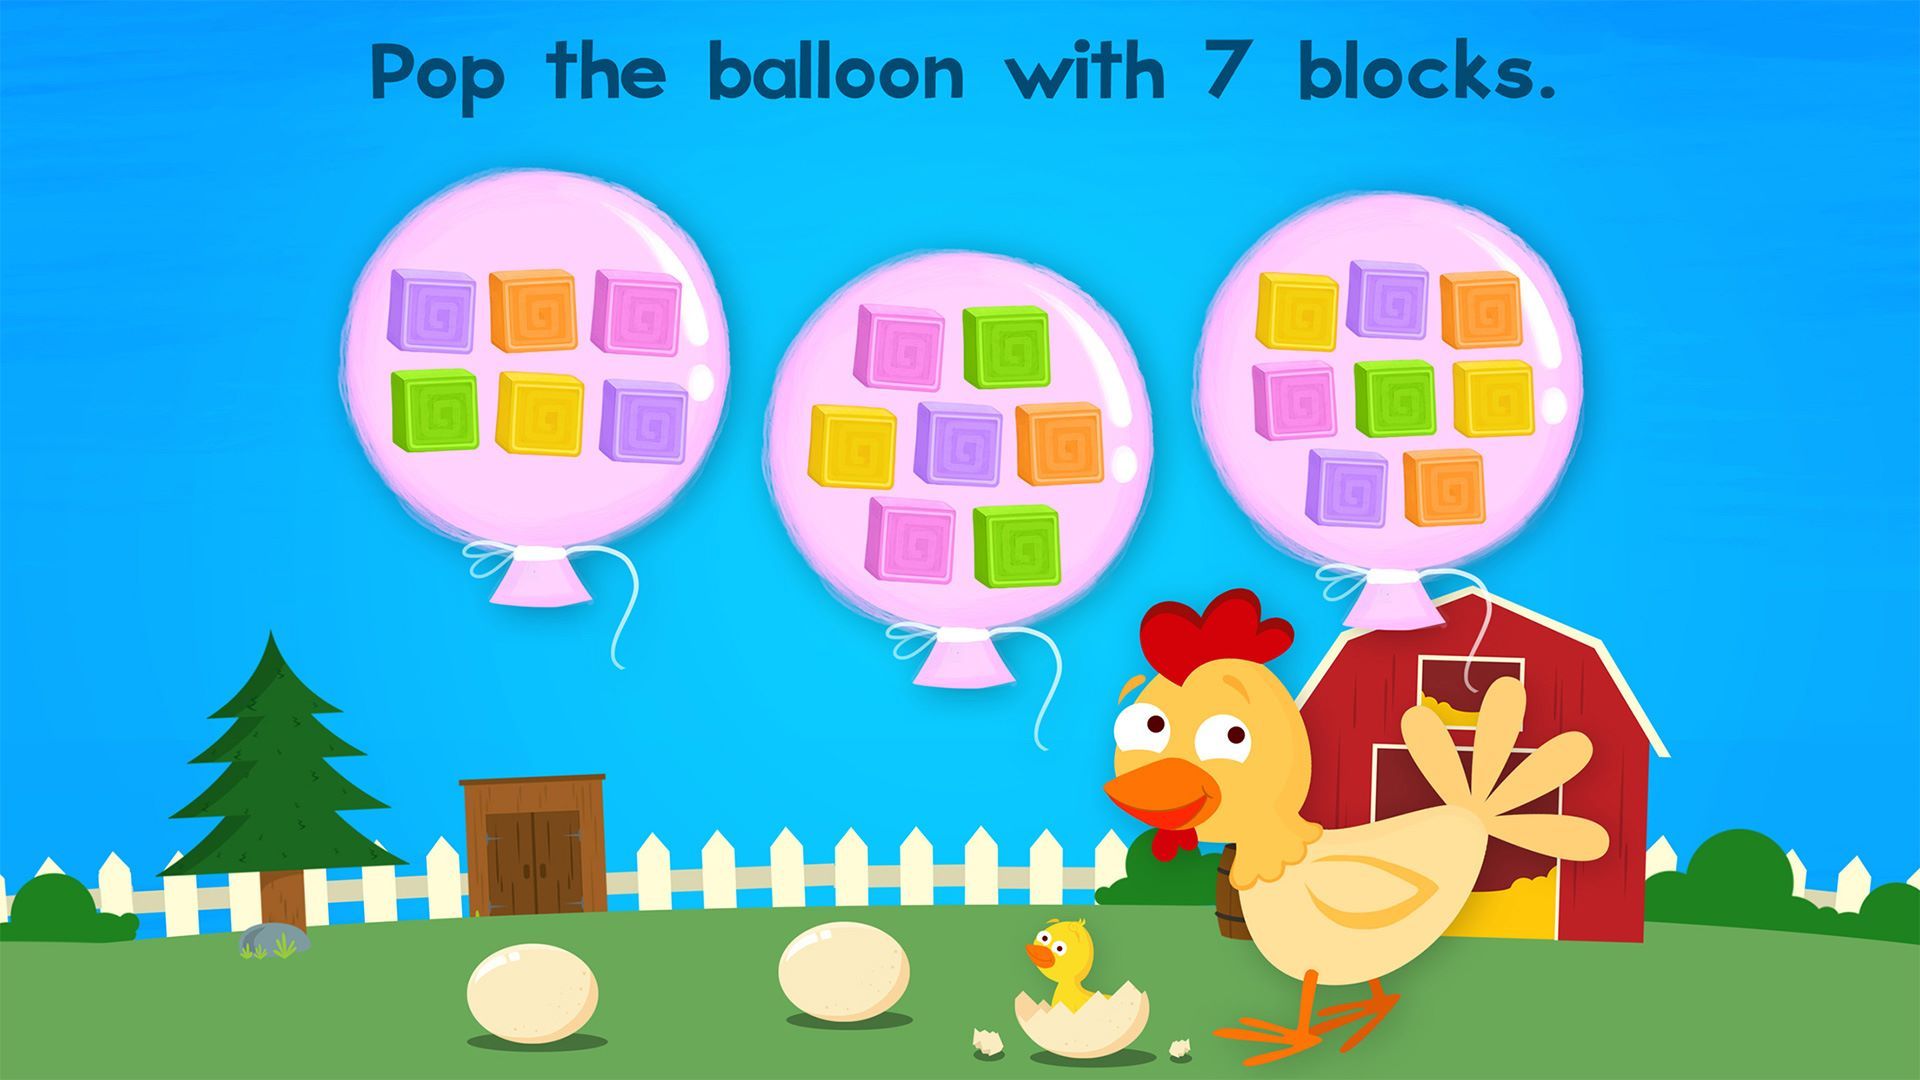 Animal Math Preschool Math Games for Toddlers and Early Learners Free Math Games for Kids Pre-K Preschoolers Learning Numbers, Counting, Addition and Subtraction